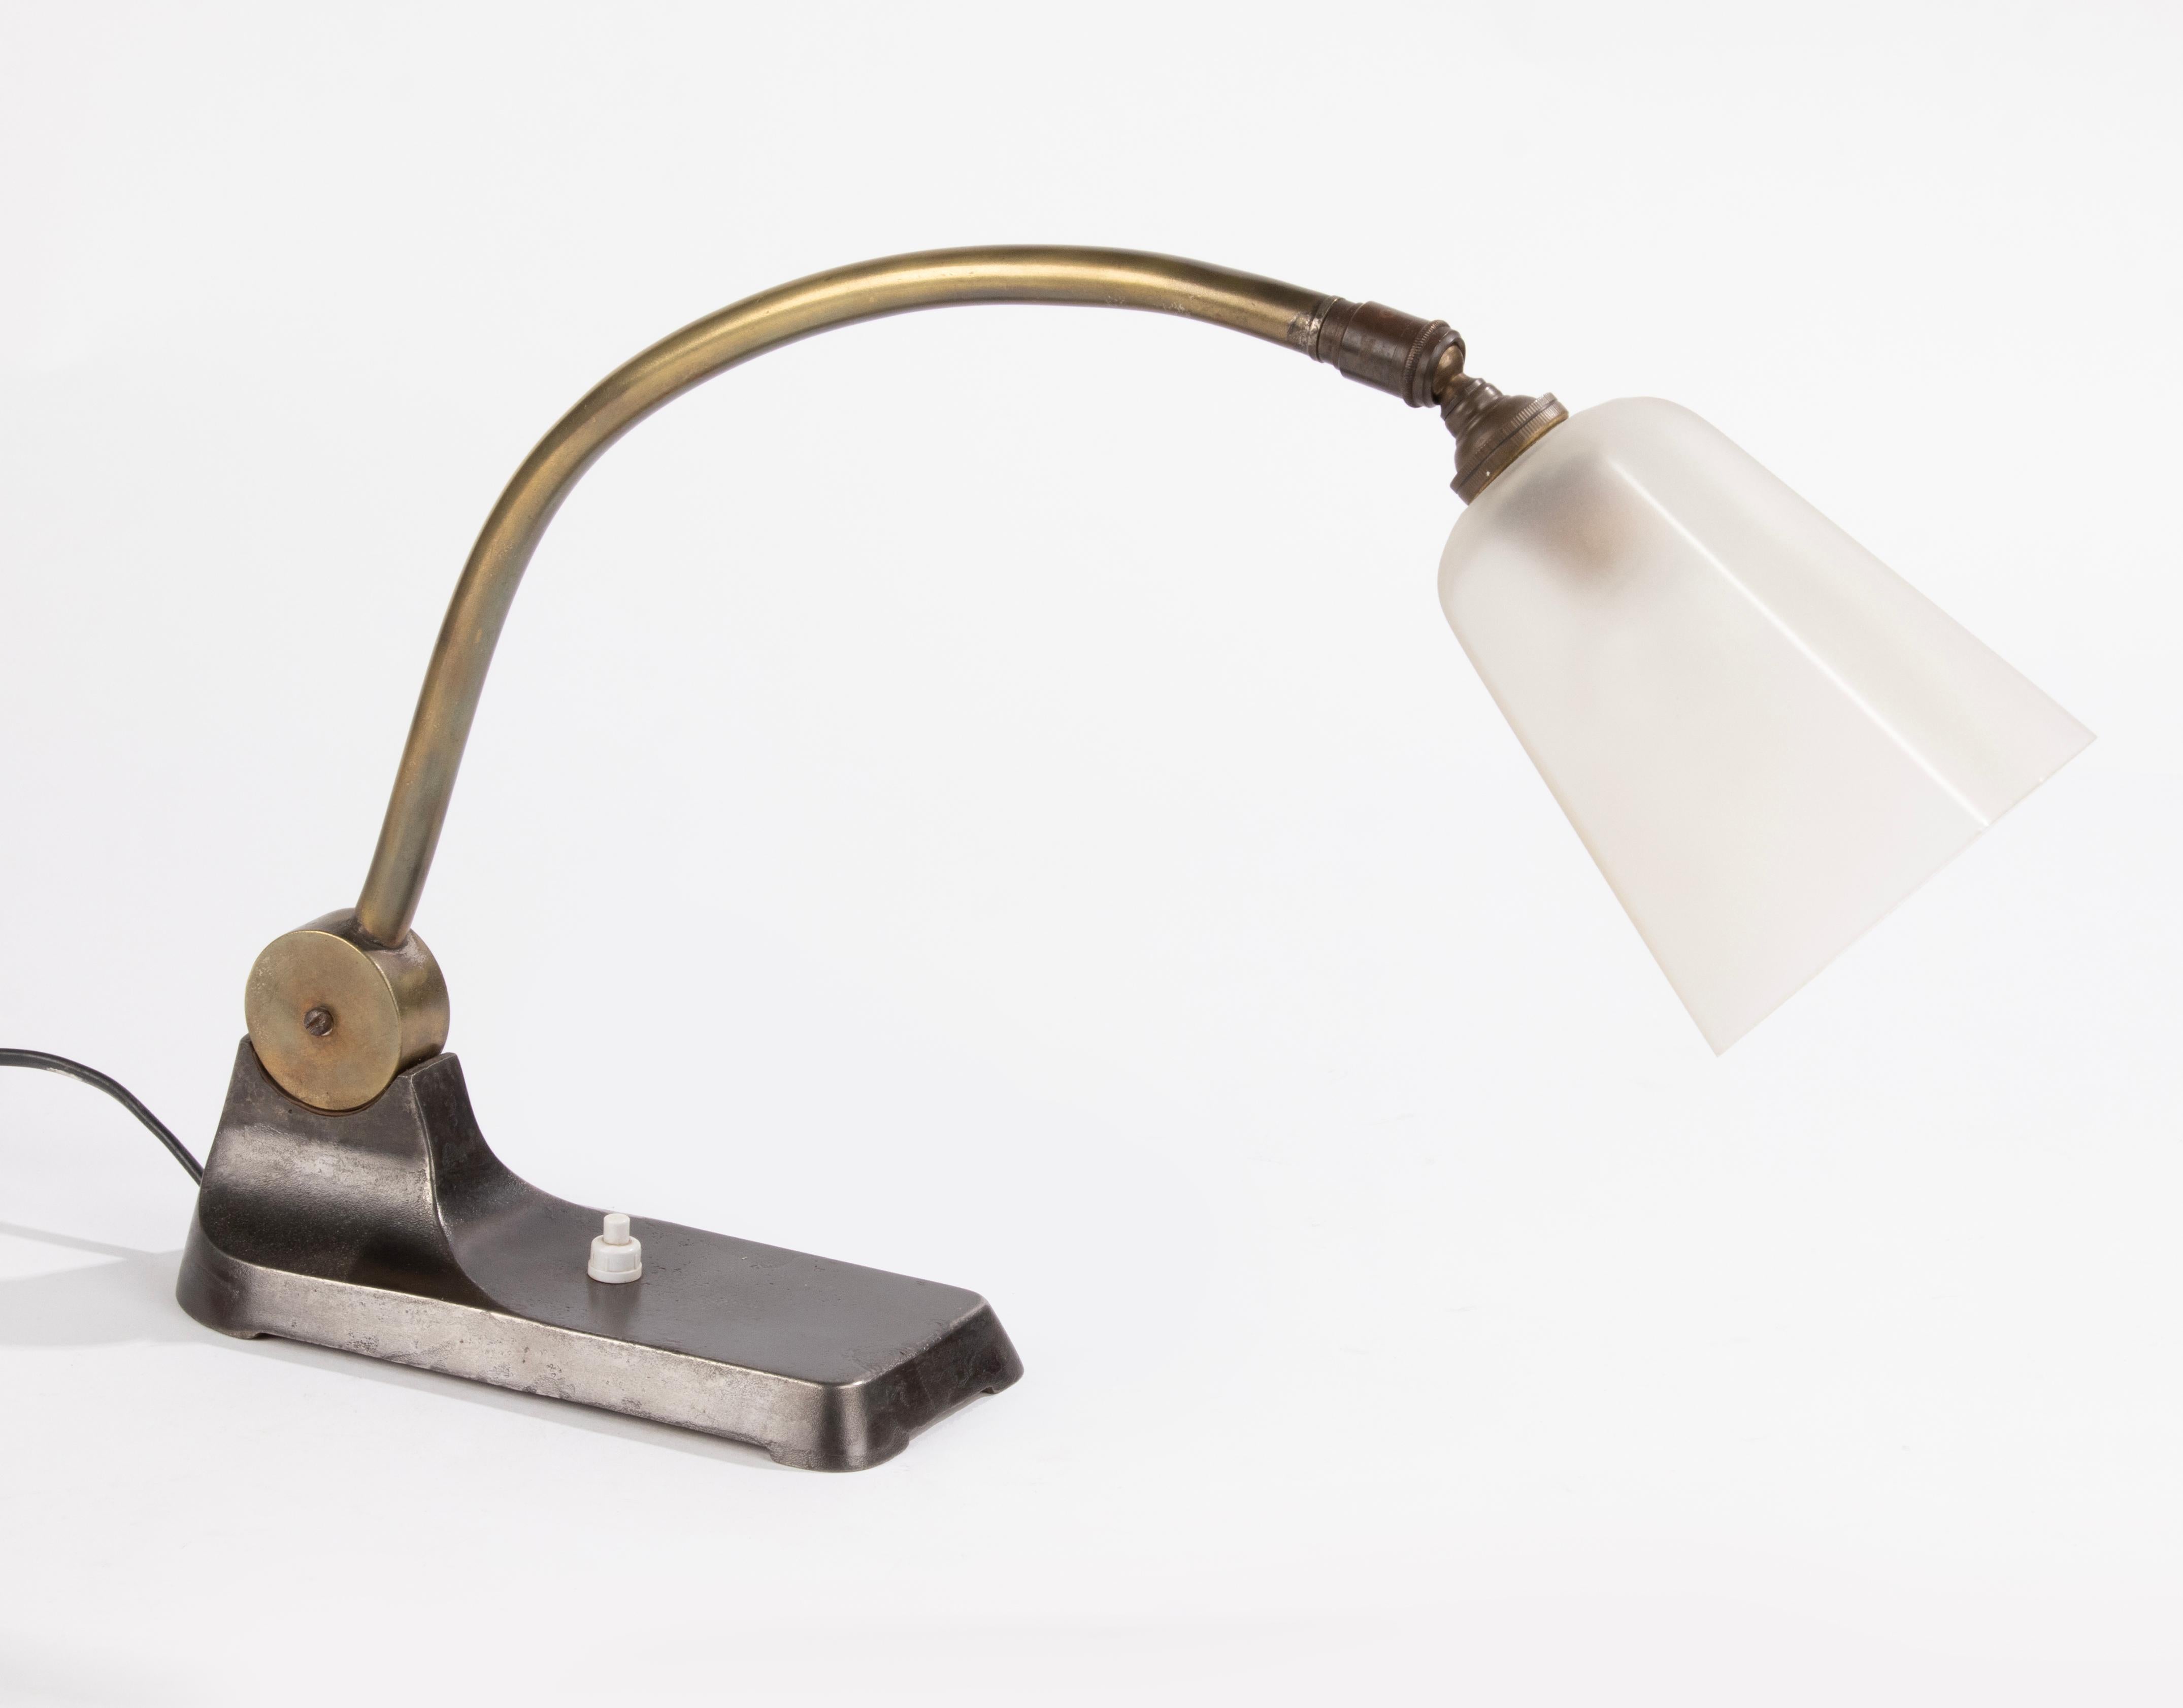 Art Deco Period Cast Iron-Brass Desk Lamp In Good Condition For Sale In Casteren, Noord-Brabant